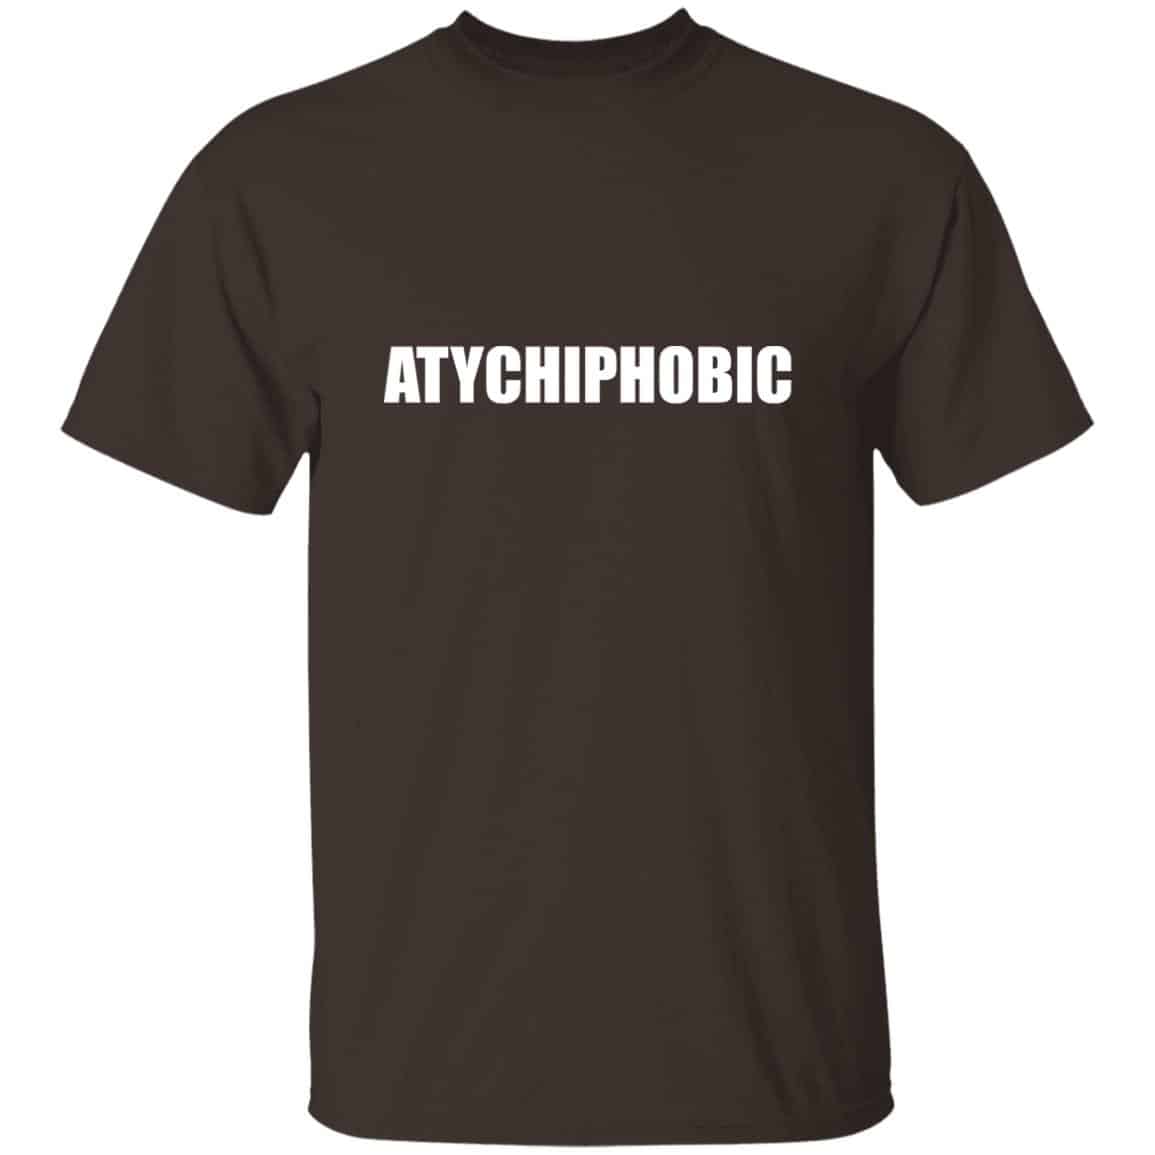 brown atychipbobia t-shirt